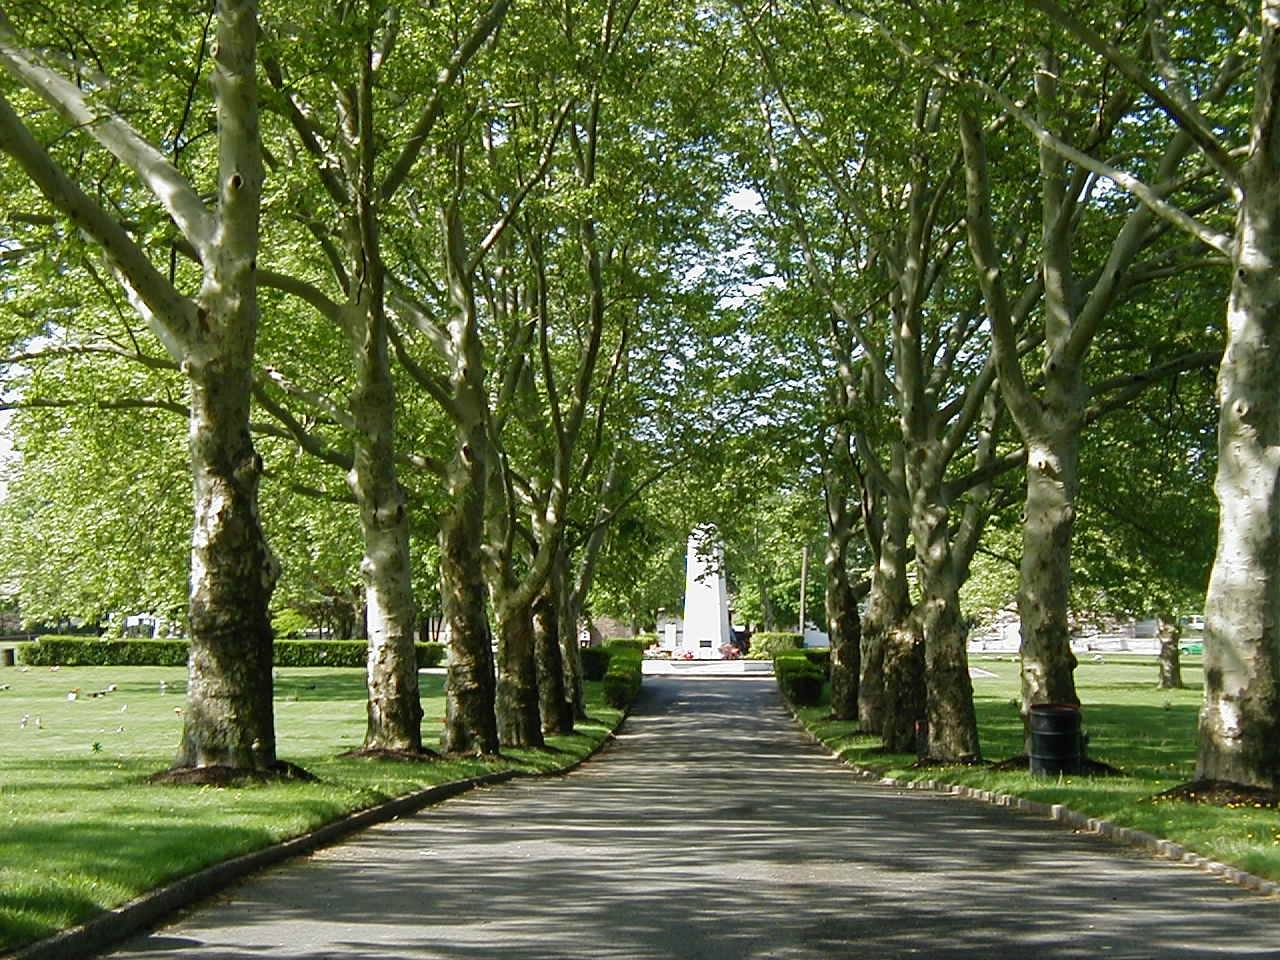 Rows of trees lining a road leading to a memorial at colonial memorial park